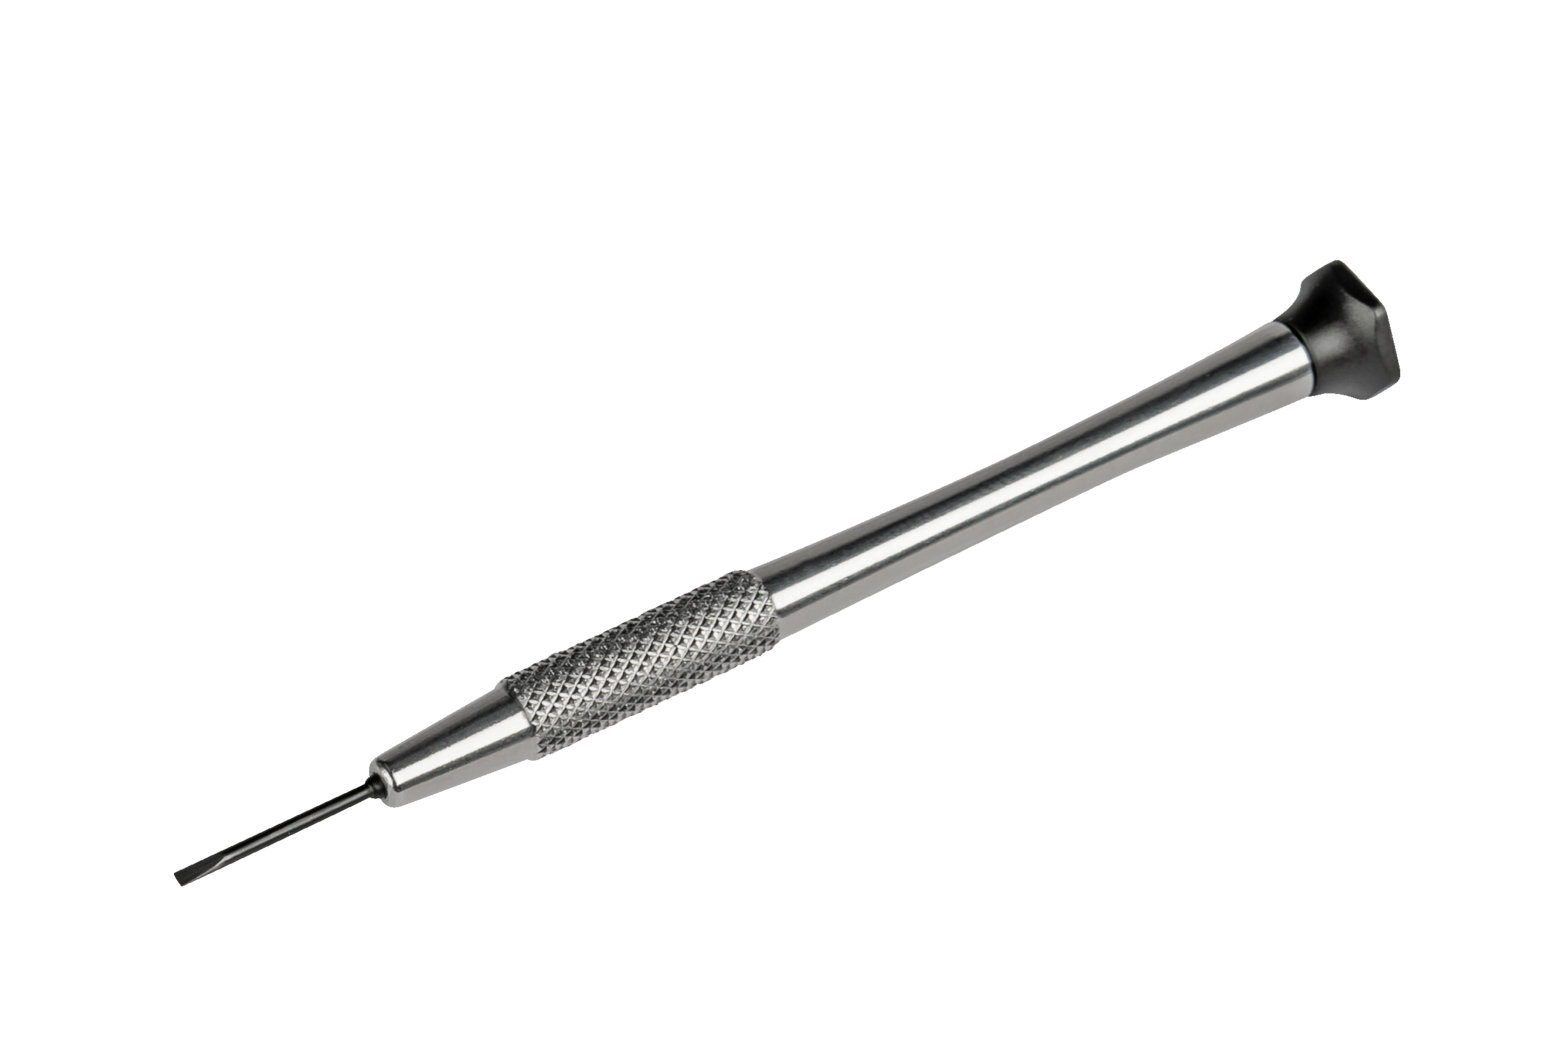 A watchmaker's screwdriver of the 250-100 series with interchangeable blades in the magazine